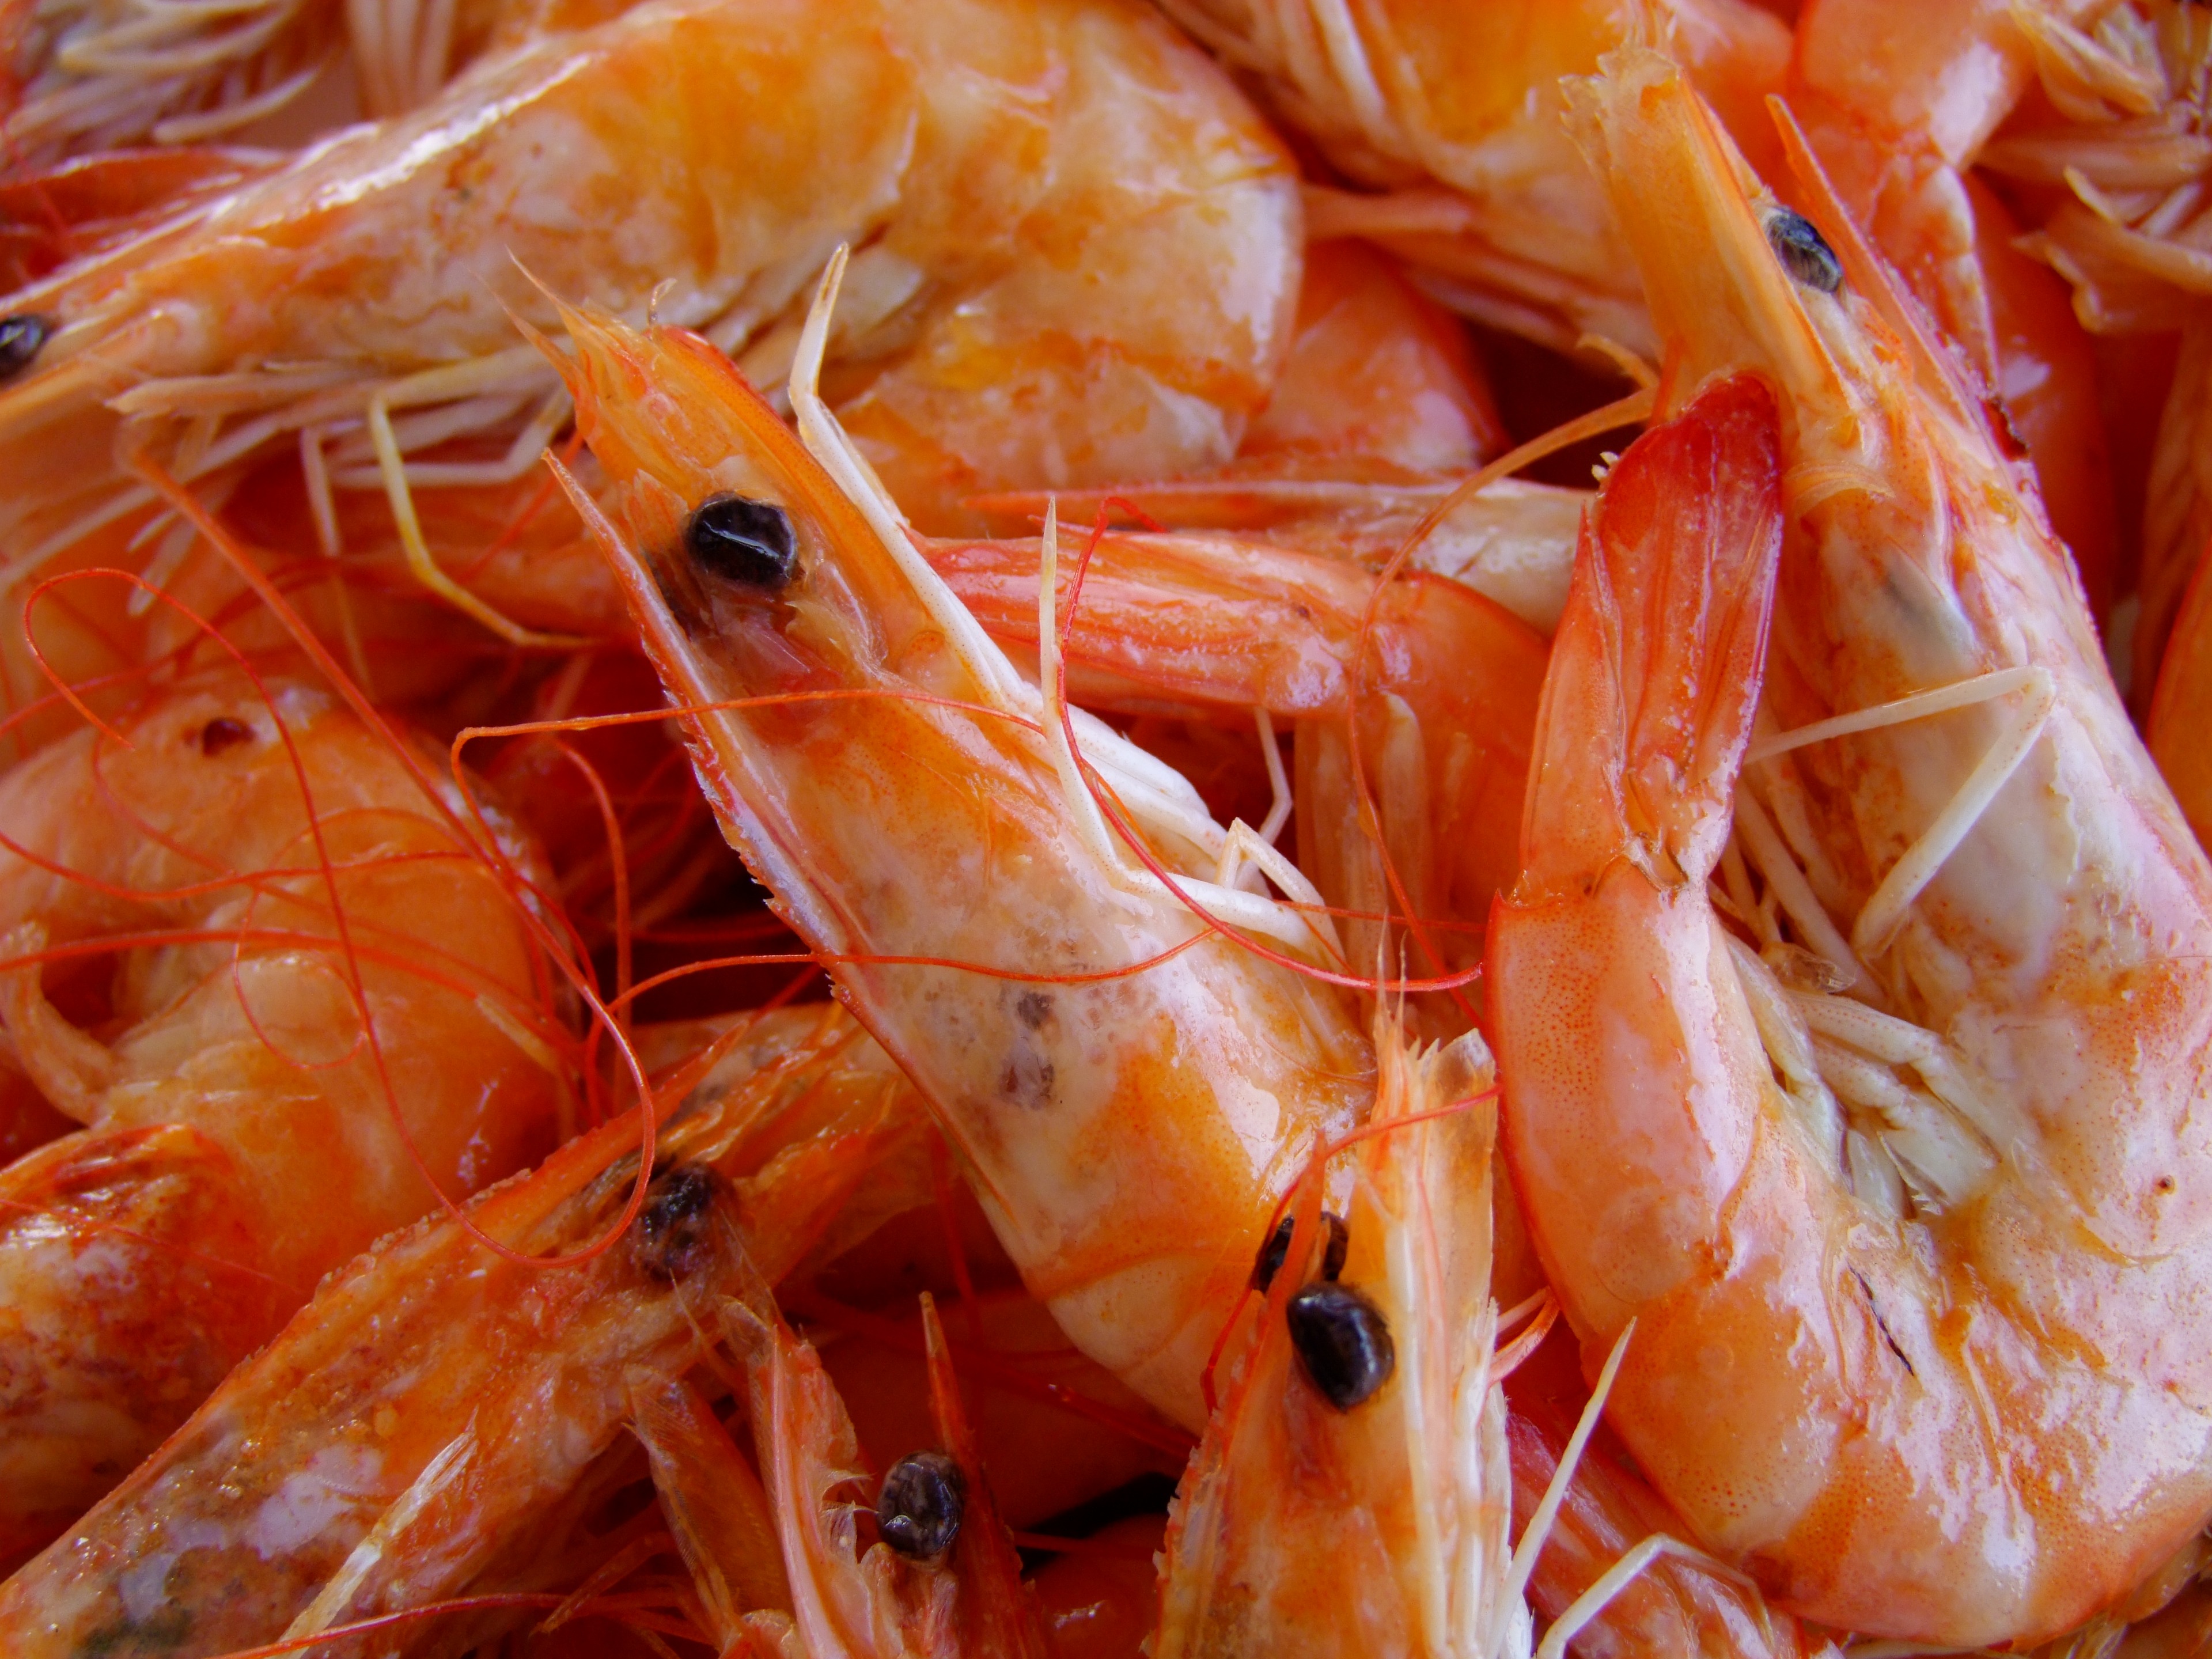 Farmed shrimp stayed stable in Asia, increased production in Latin America, GLOBEFISH